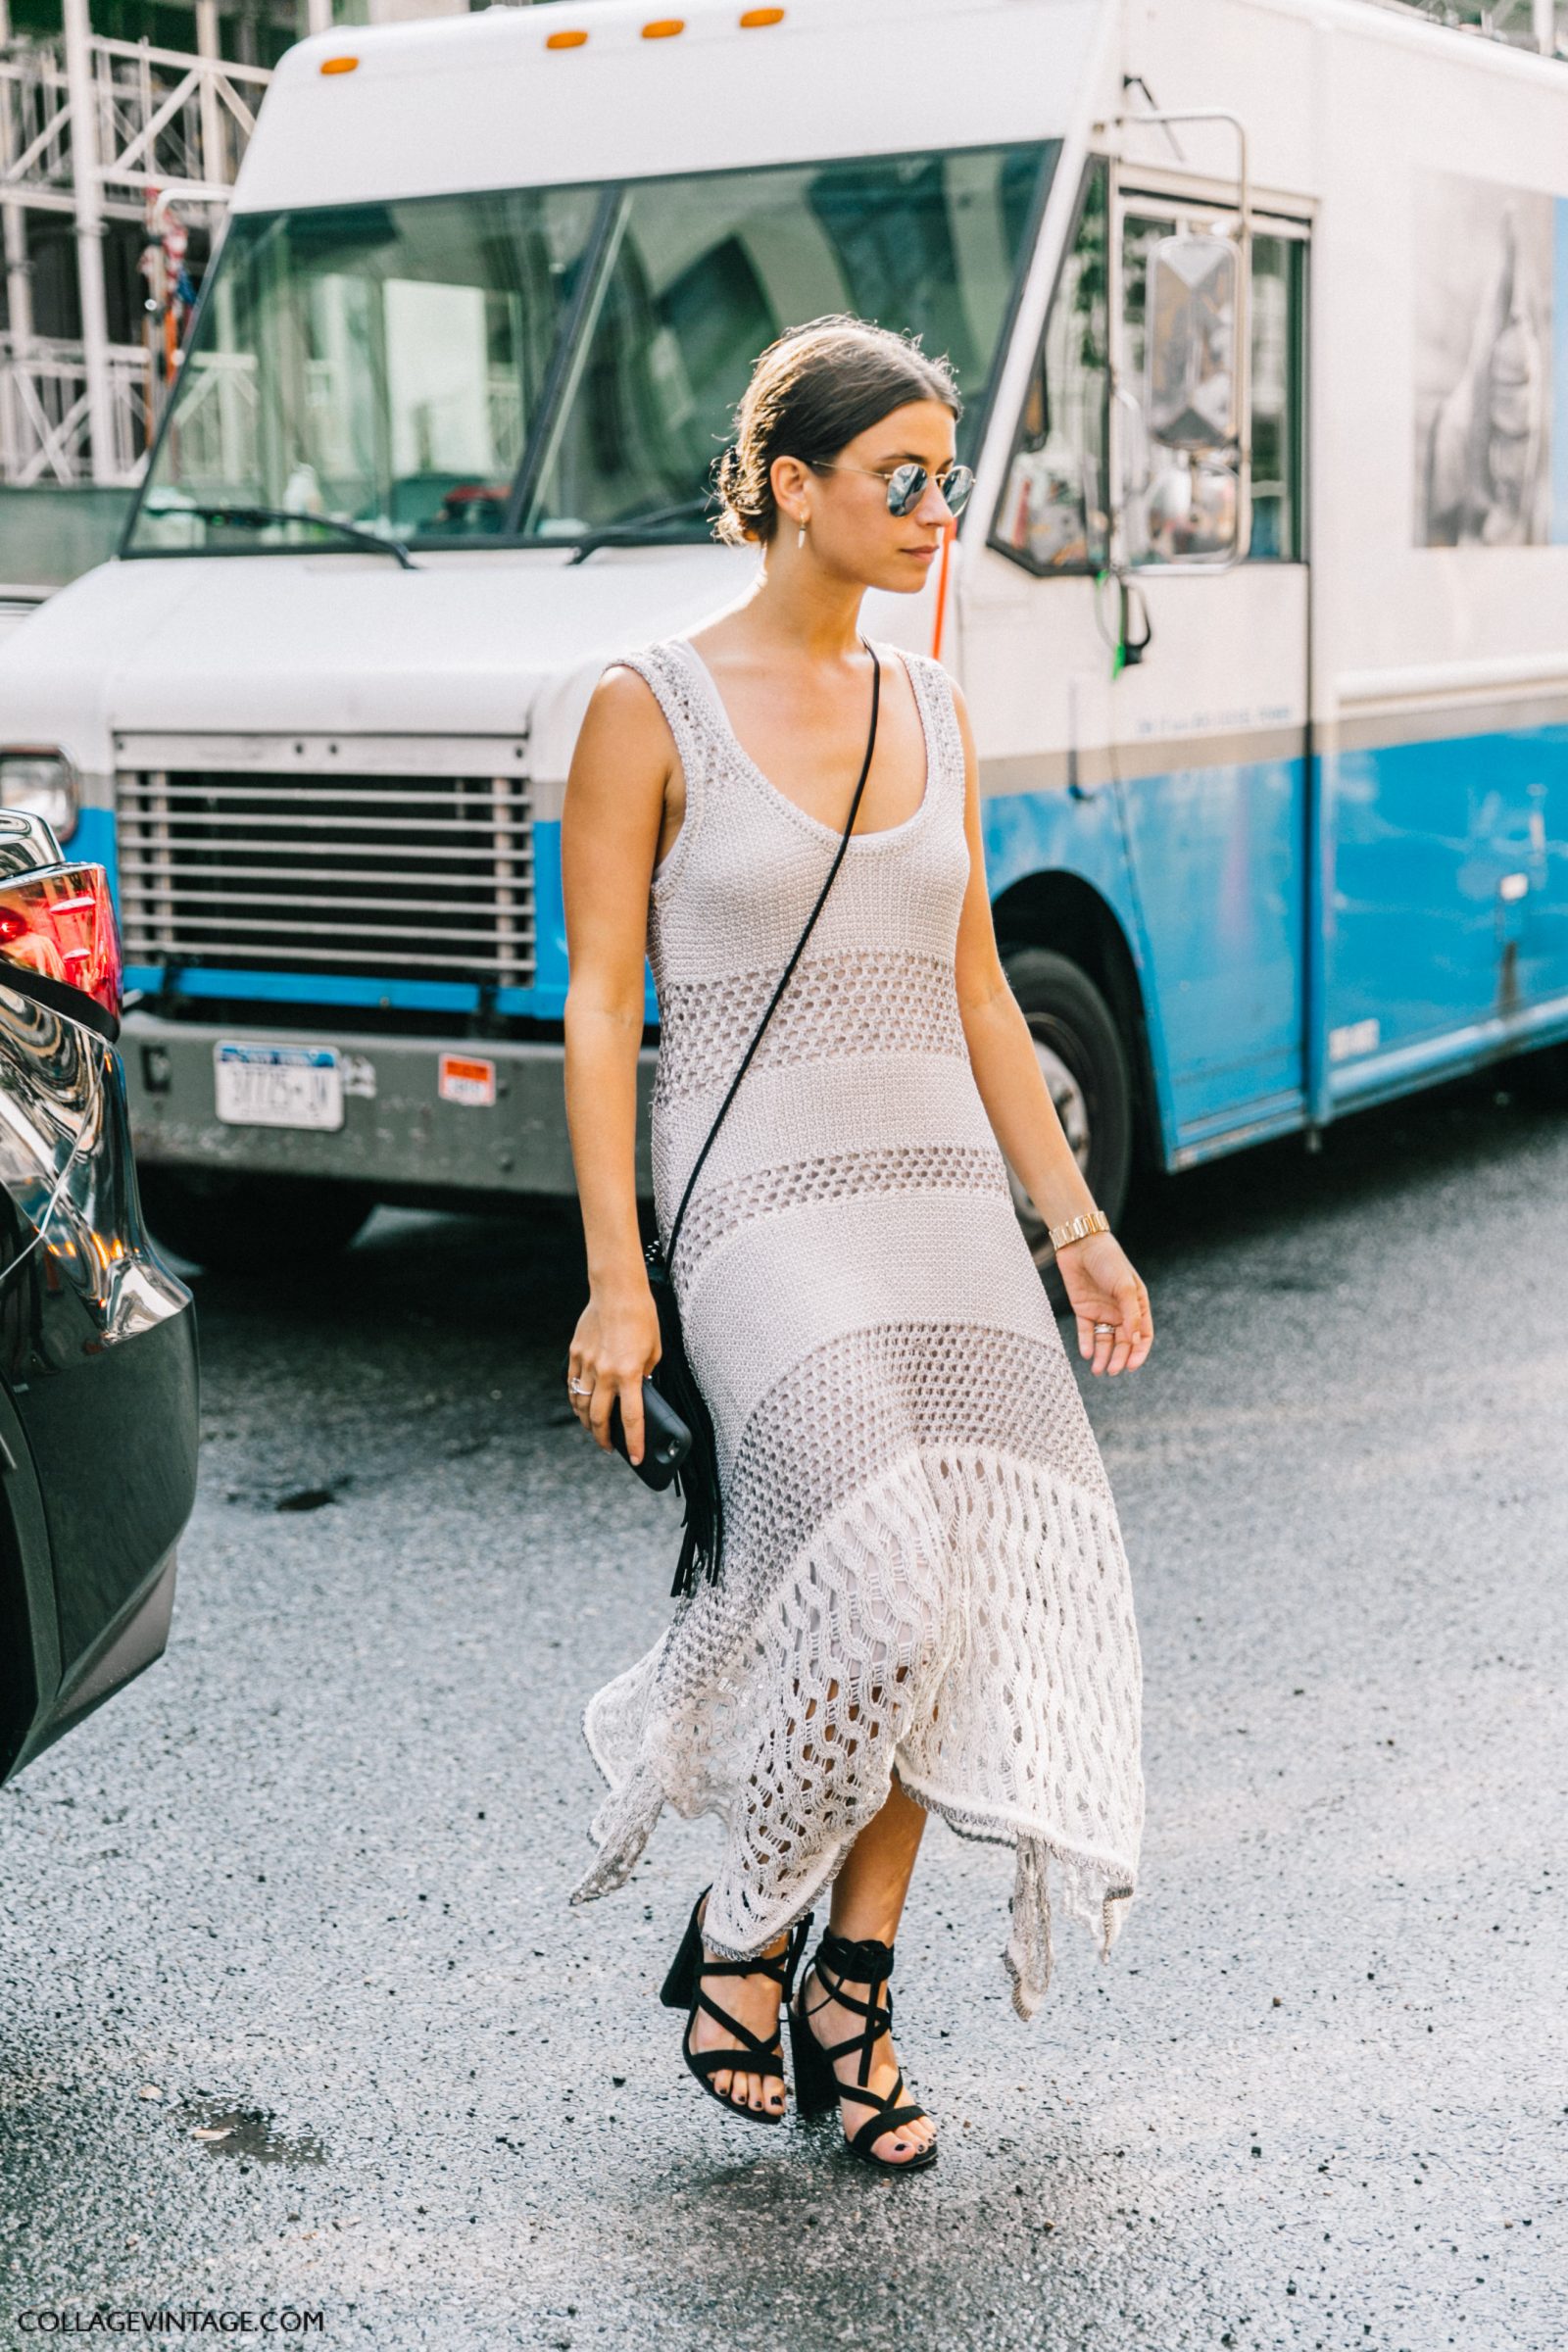 nyfw-new_york_fashion_week_ss17-street_style-outfits-collage_vintage-54